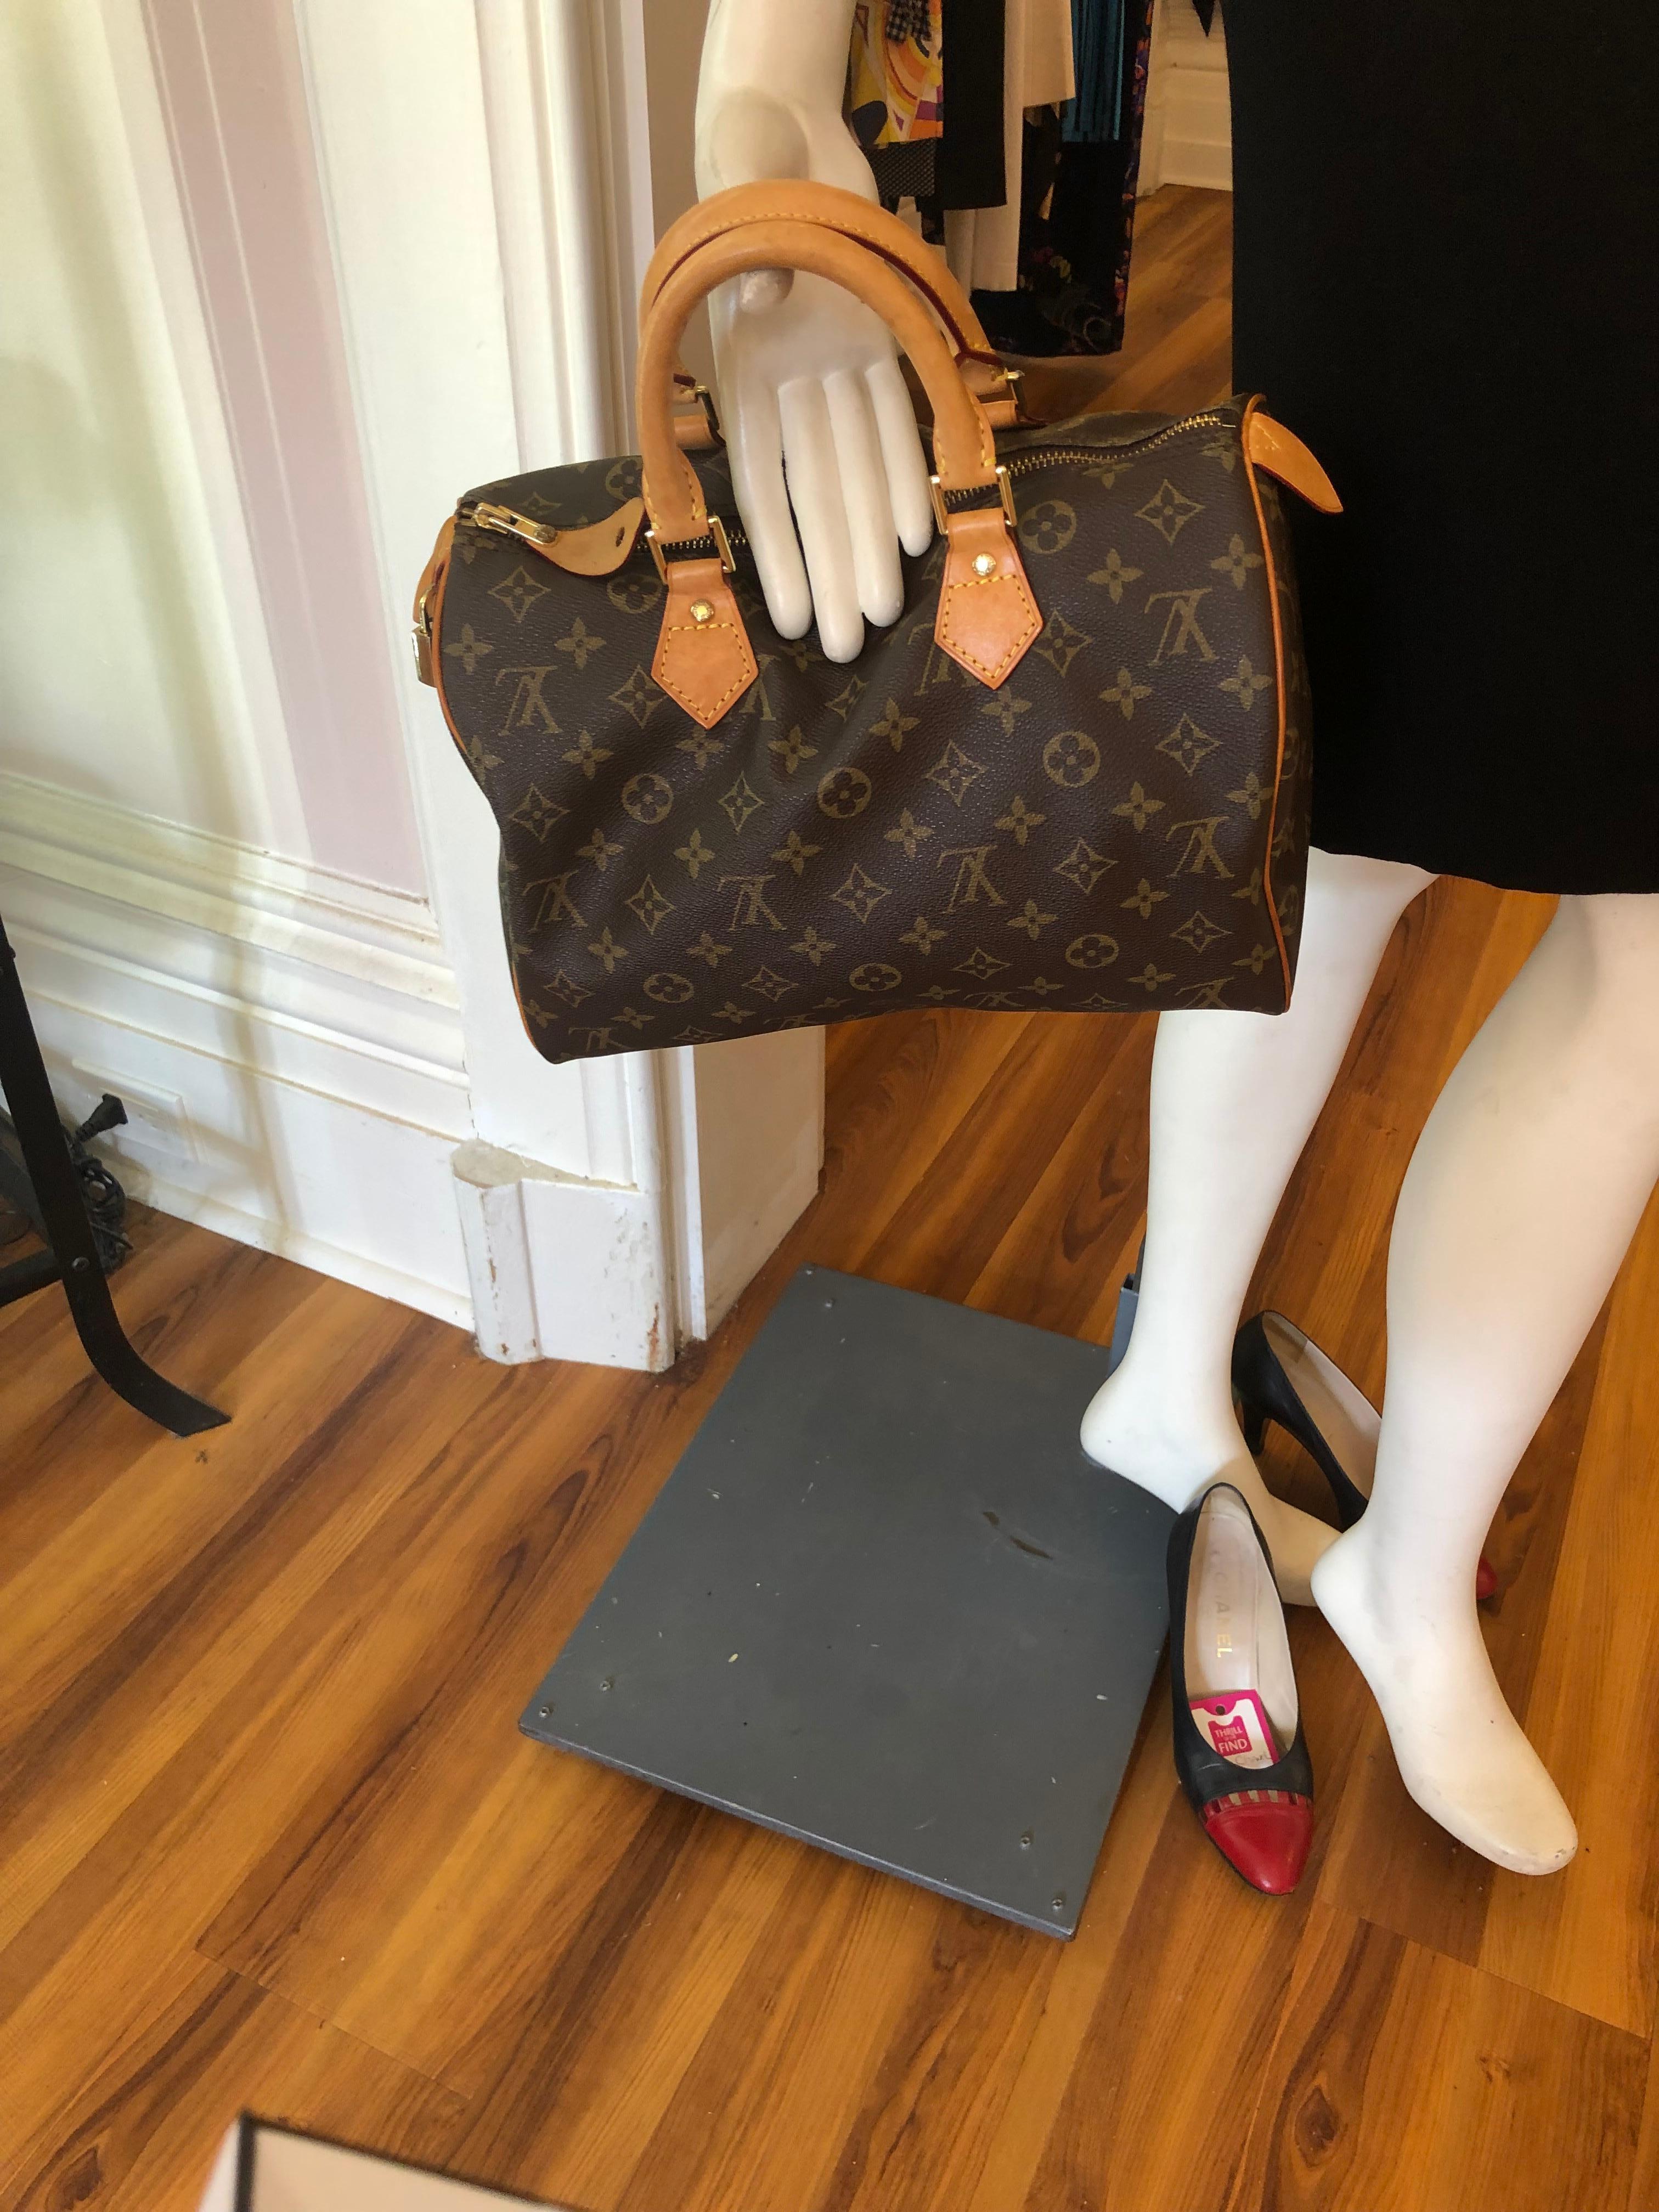 Made in France in March 2001 (AR0031), this LV Speedy 30 monogram canvas with vachetta leather is nice size bag, and can function as a carry all. The brown textile lining has an open pockets for small items and a Dring. The top handles are rolled;